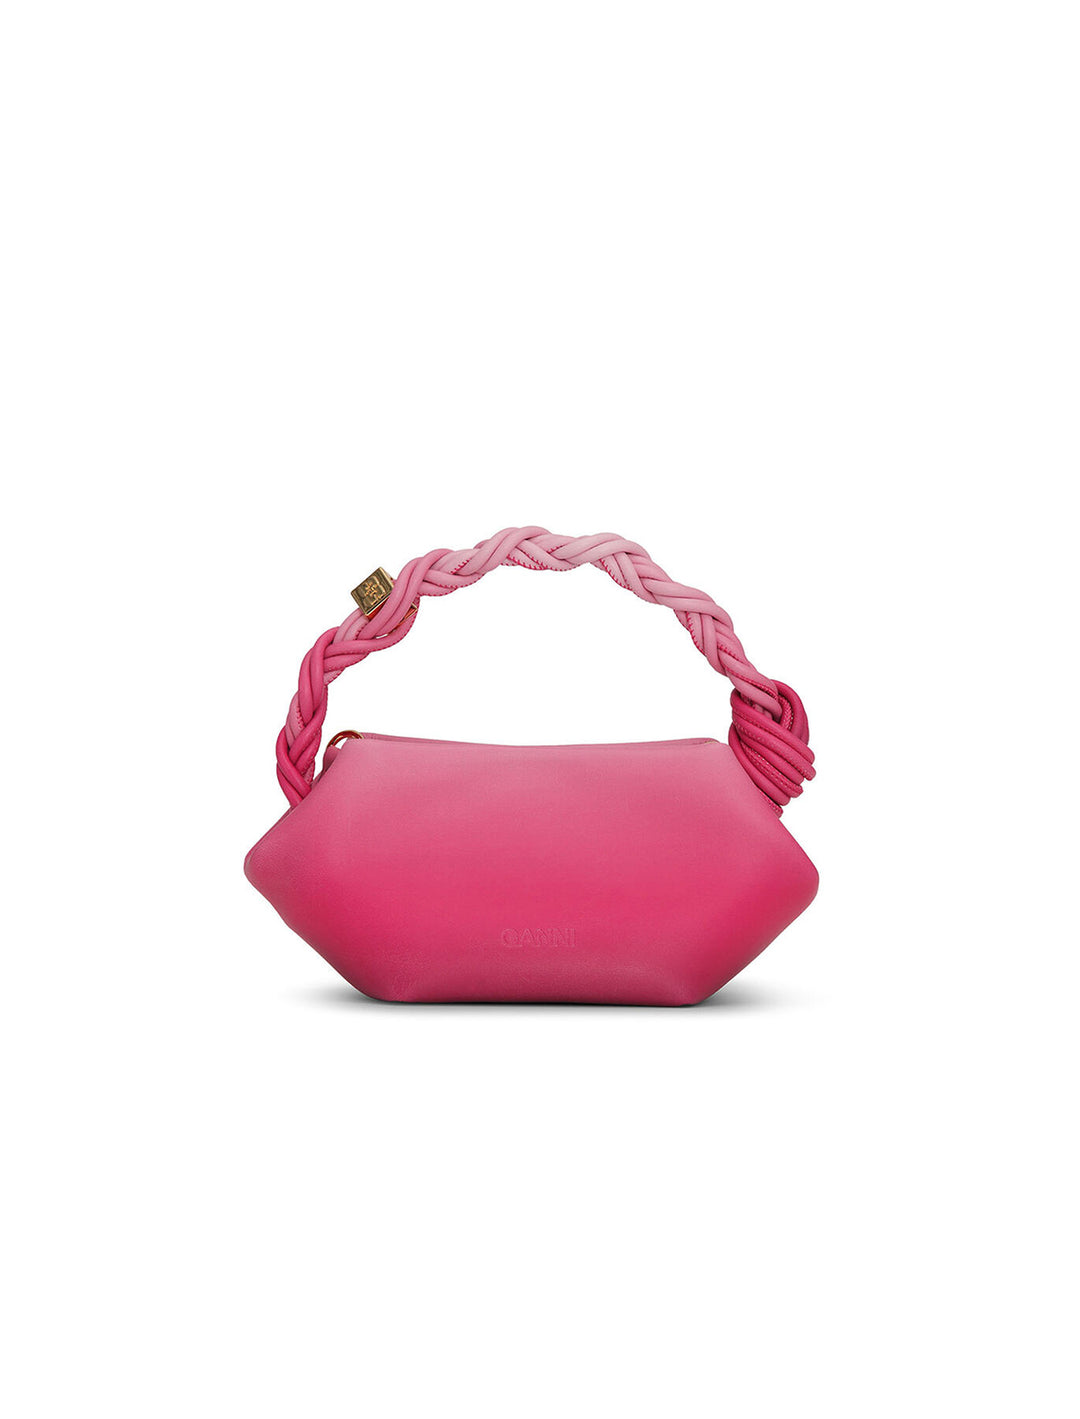 Back view of GANNI's mini bou bag in gradient pink.